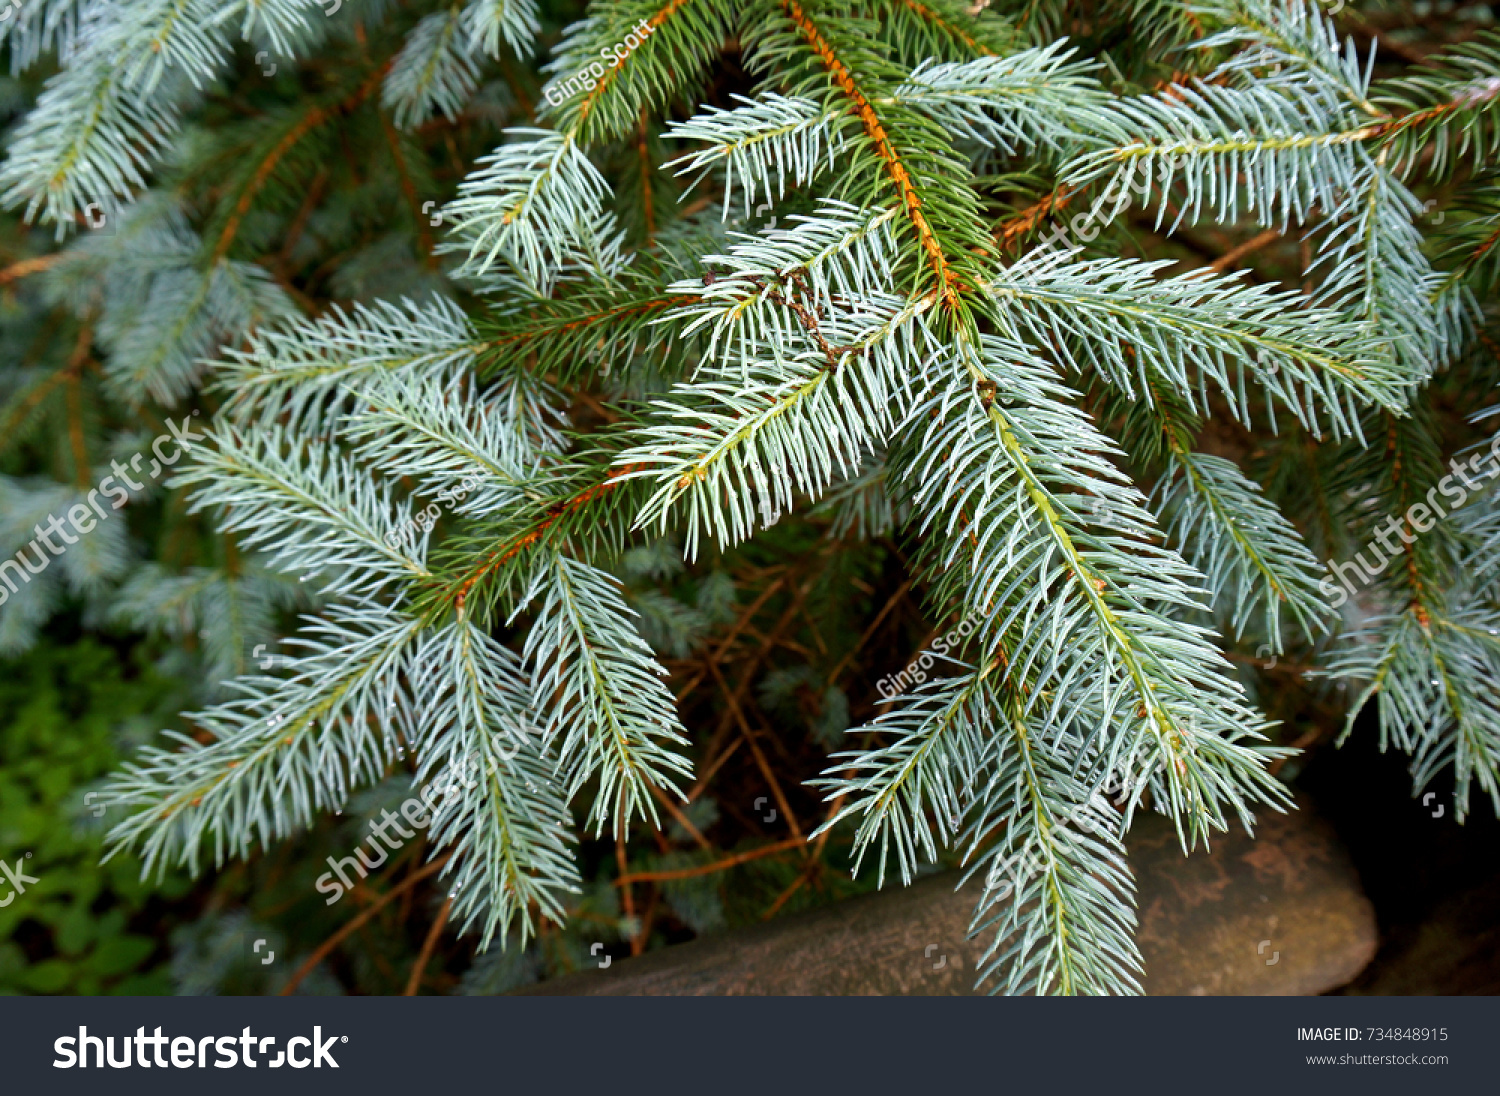 Close Up of a Pine Tree Branch at a Christmas Tree Farm #734848915